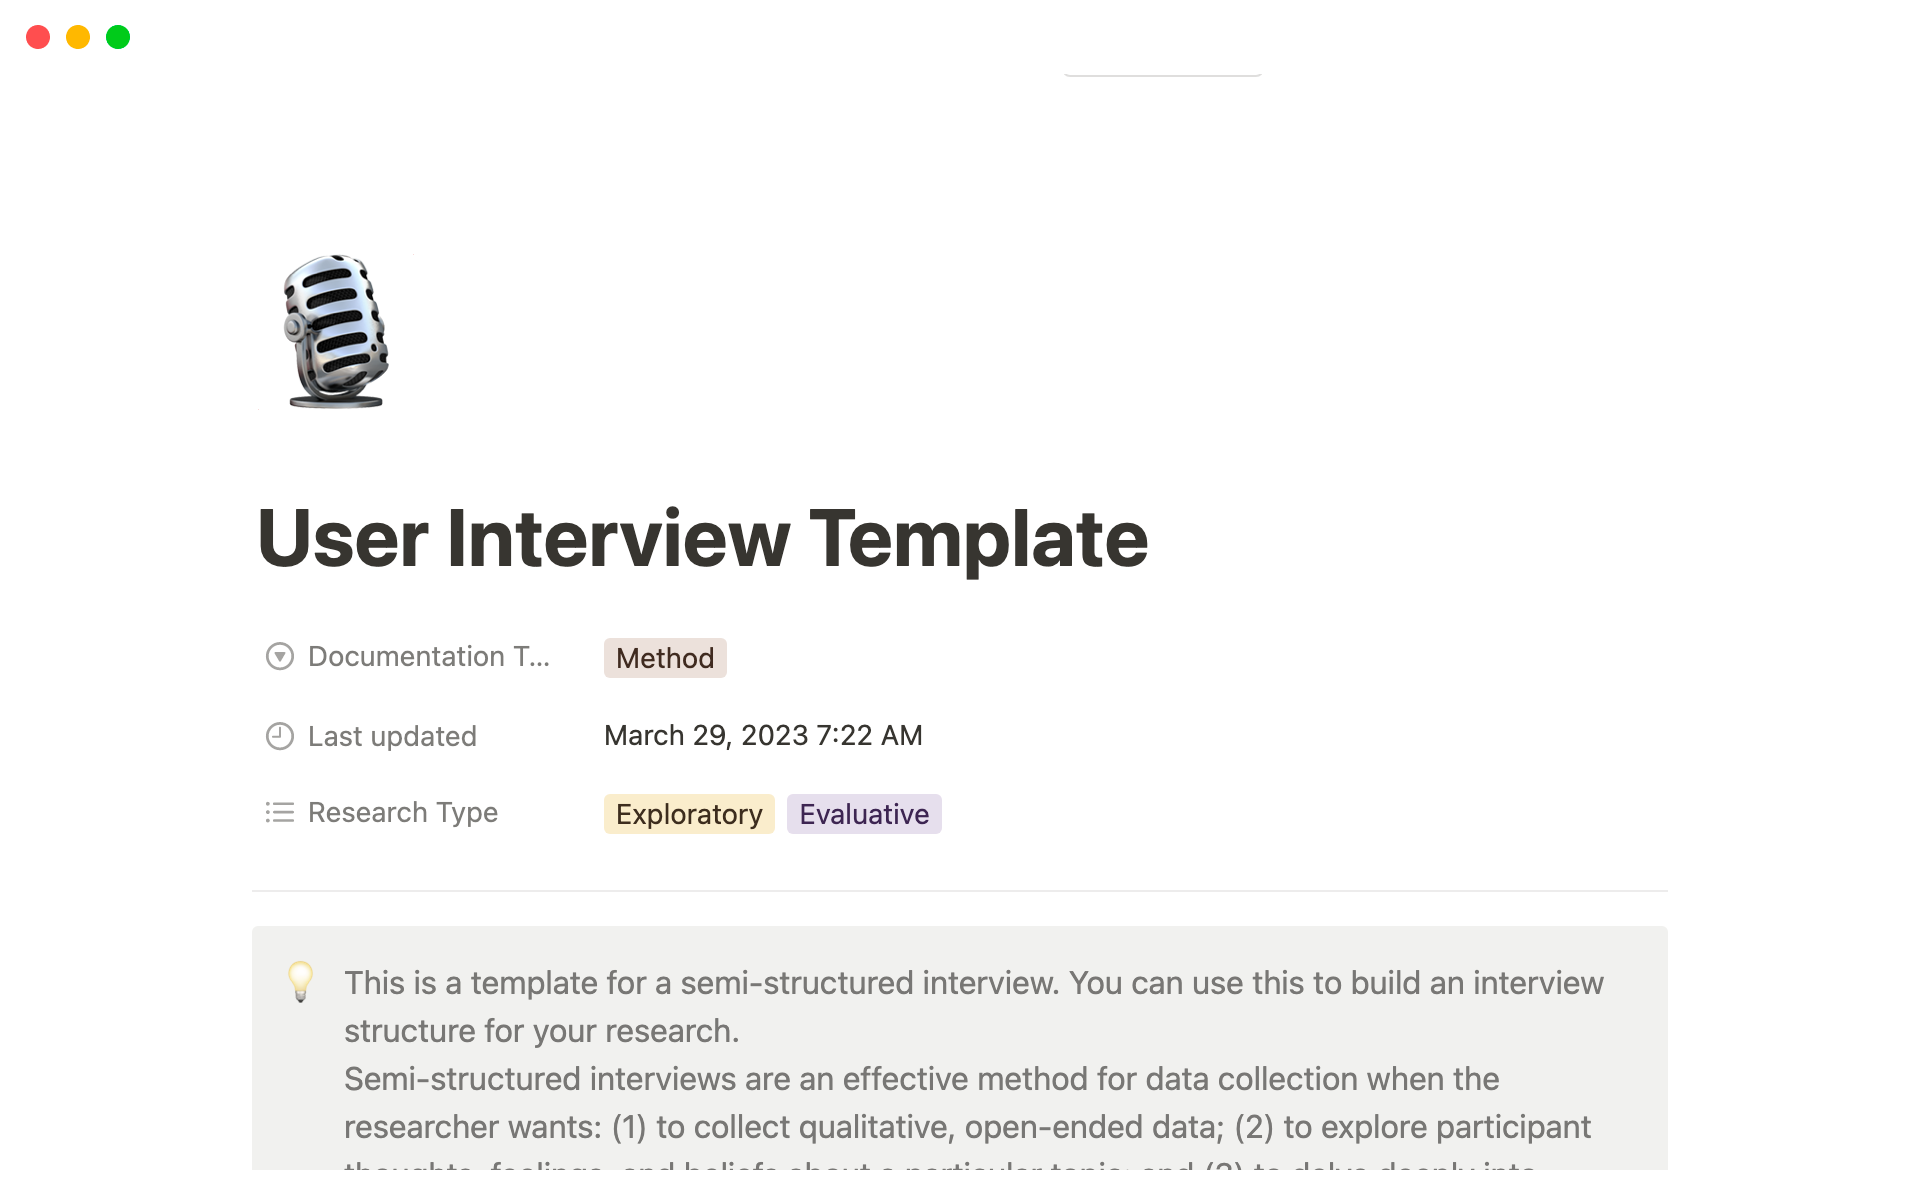 This template will help UX Researchers set up and plan a semi-structured user interview as part of their research project